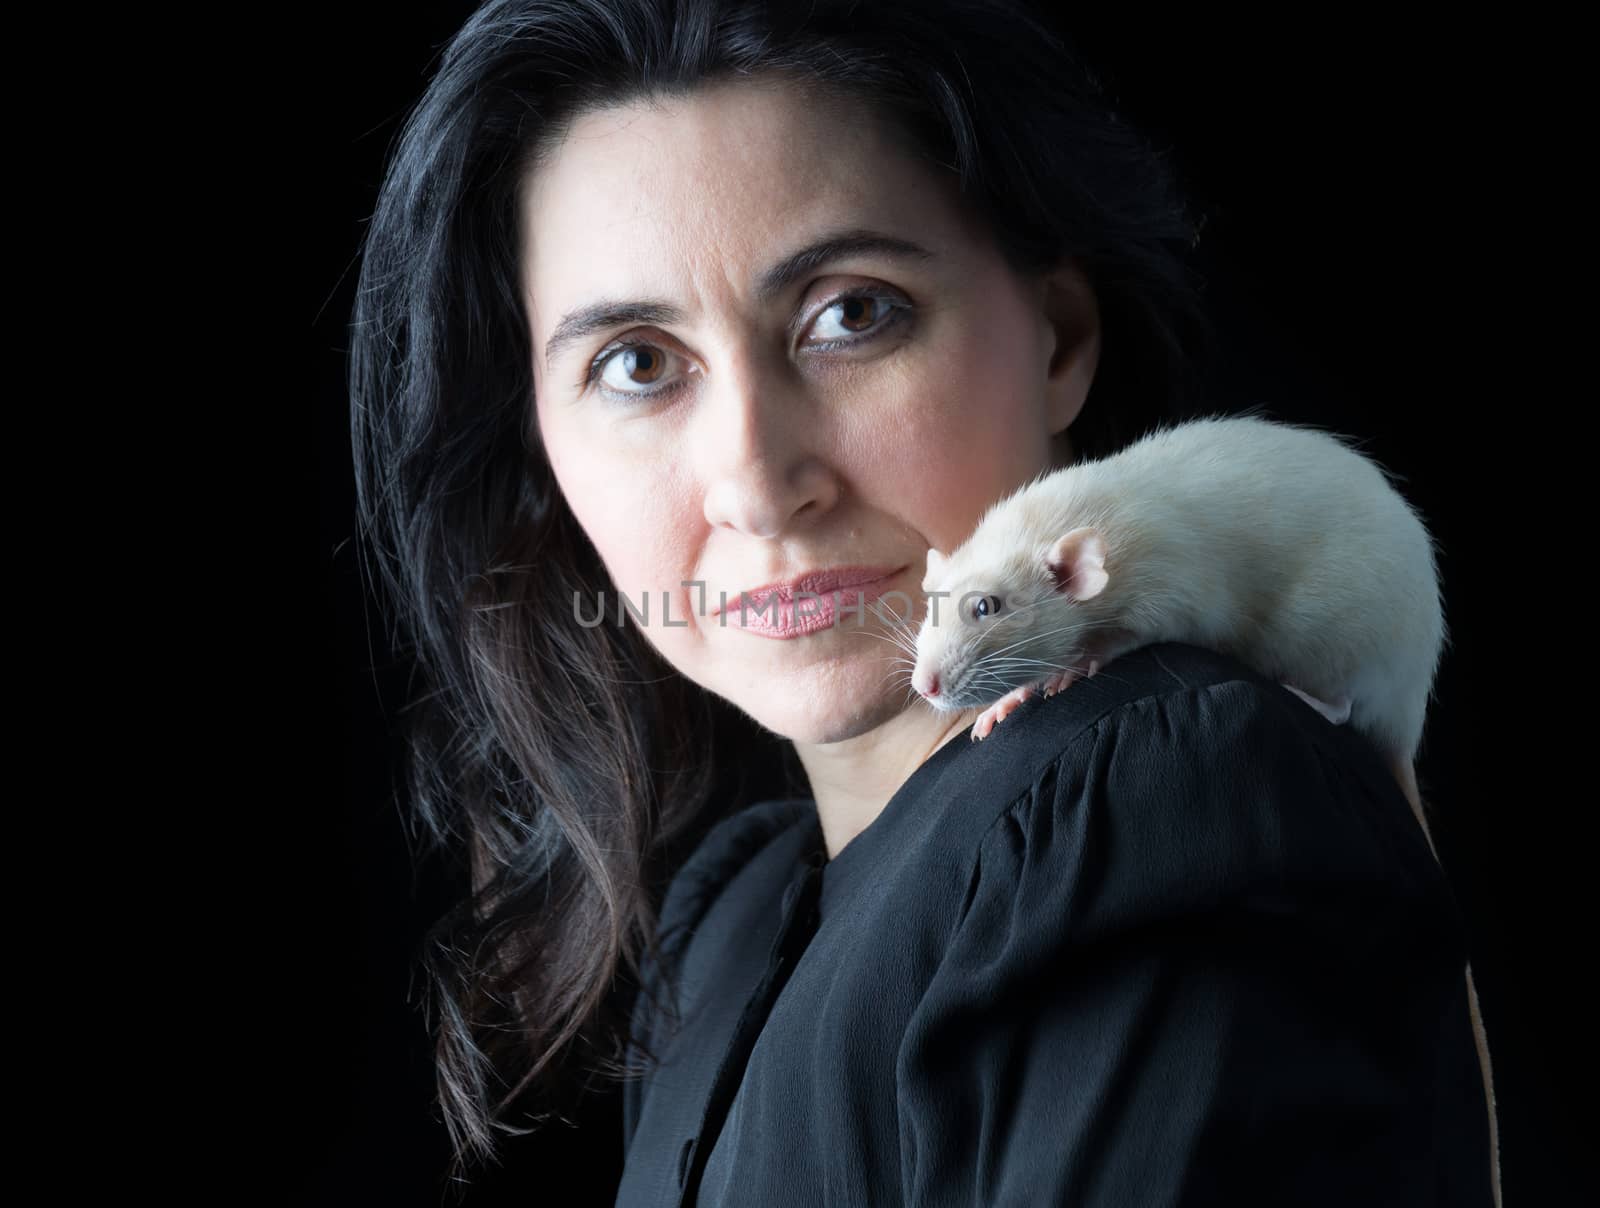 Woman in black standing in front of a black backdrop with a white dumbo rat perched on her shoulder.